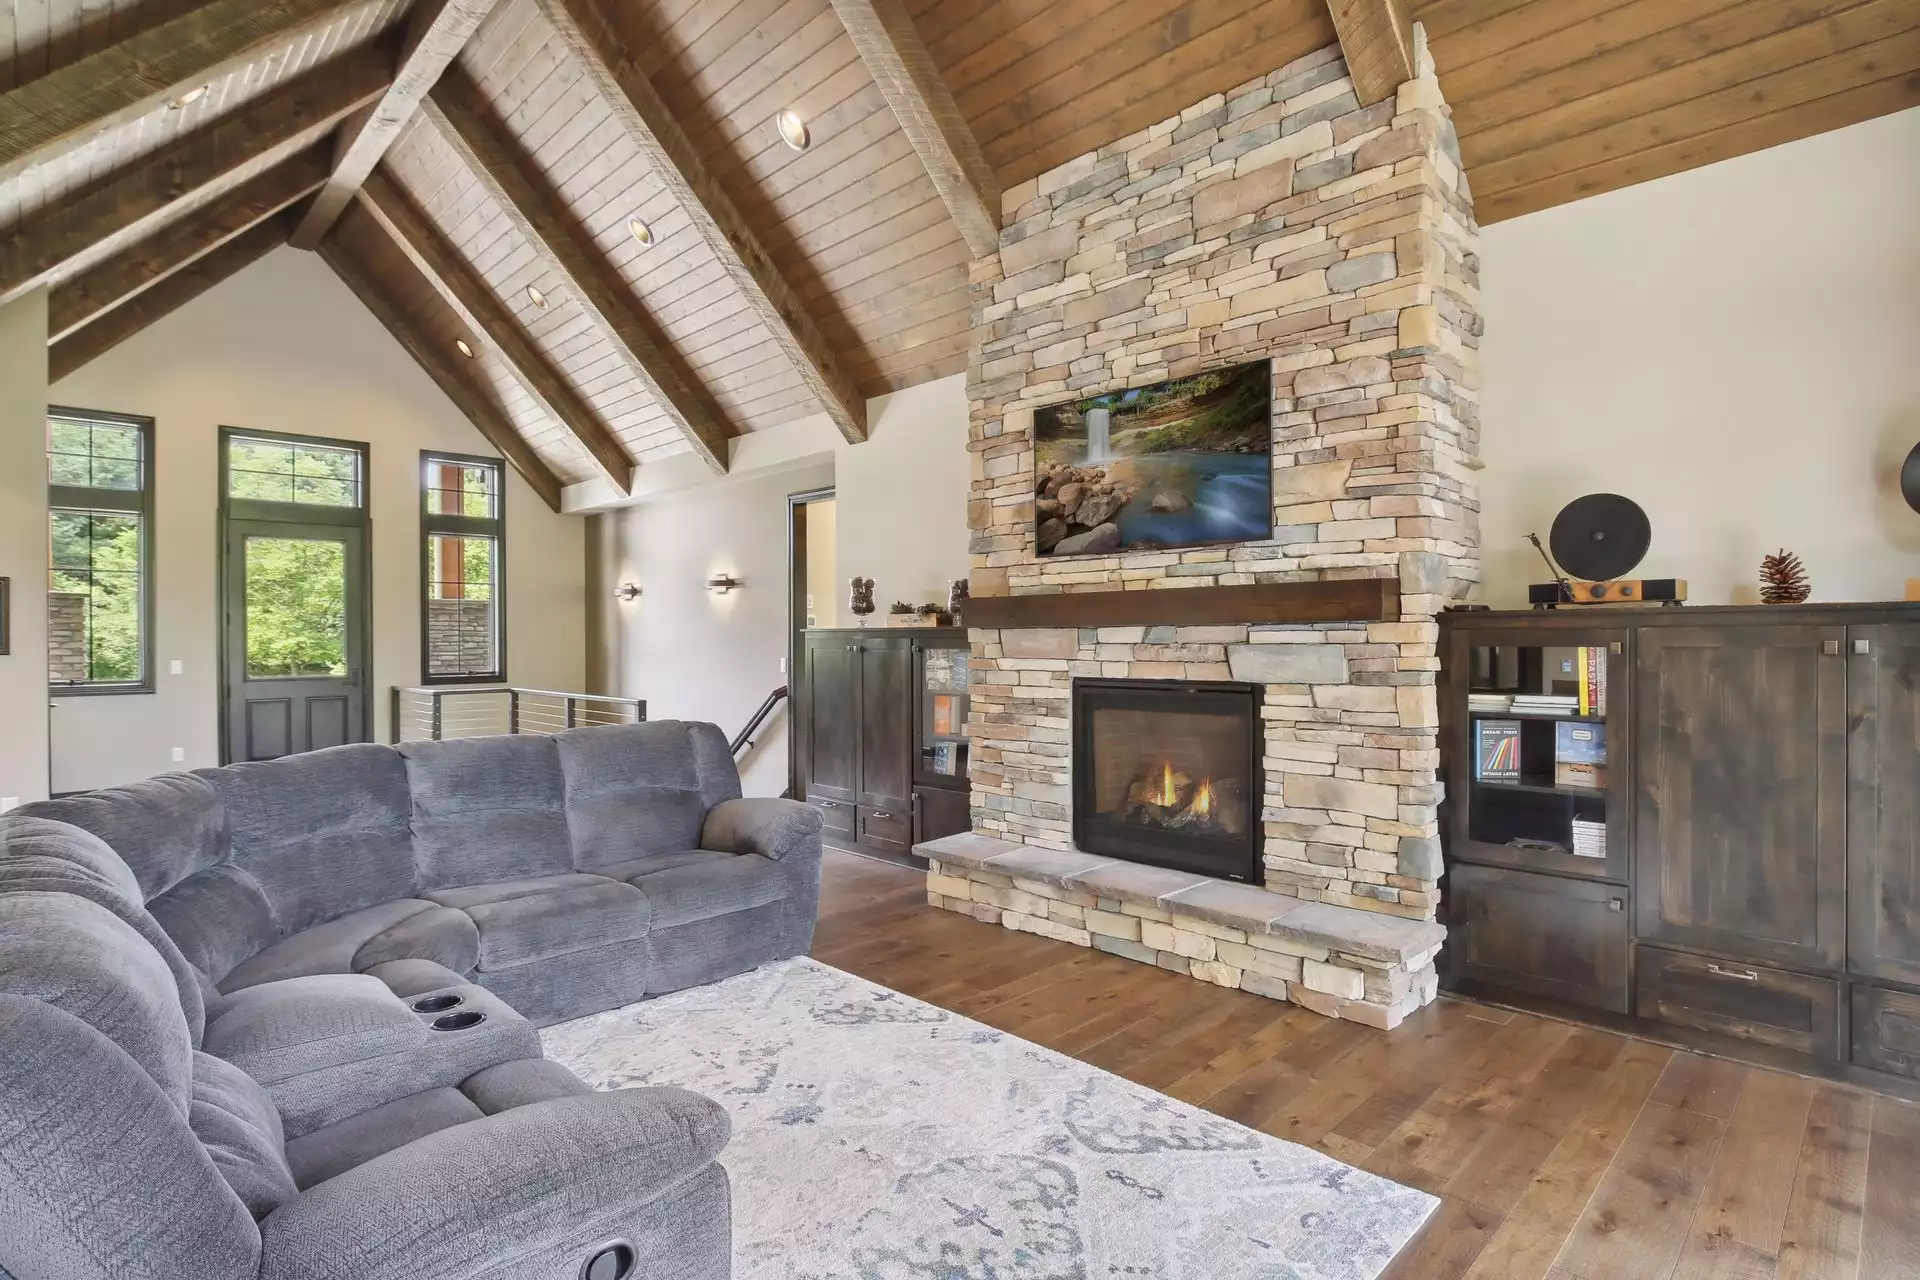 Floor to ceiling stone fireplace